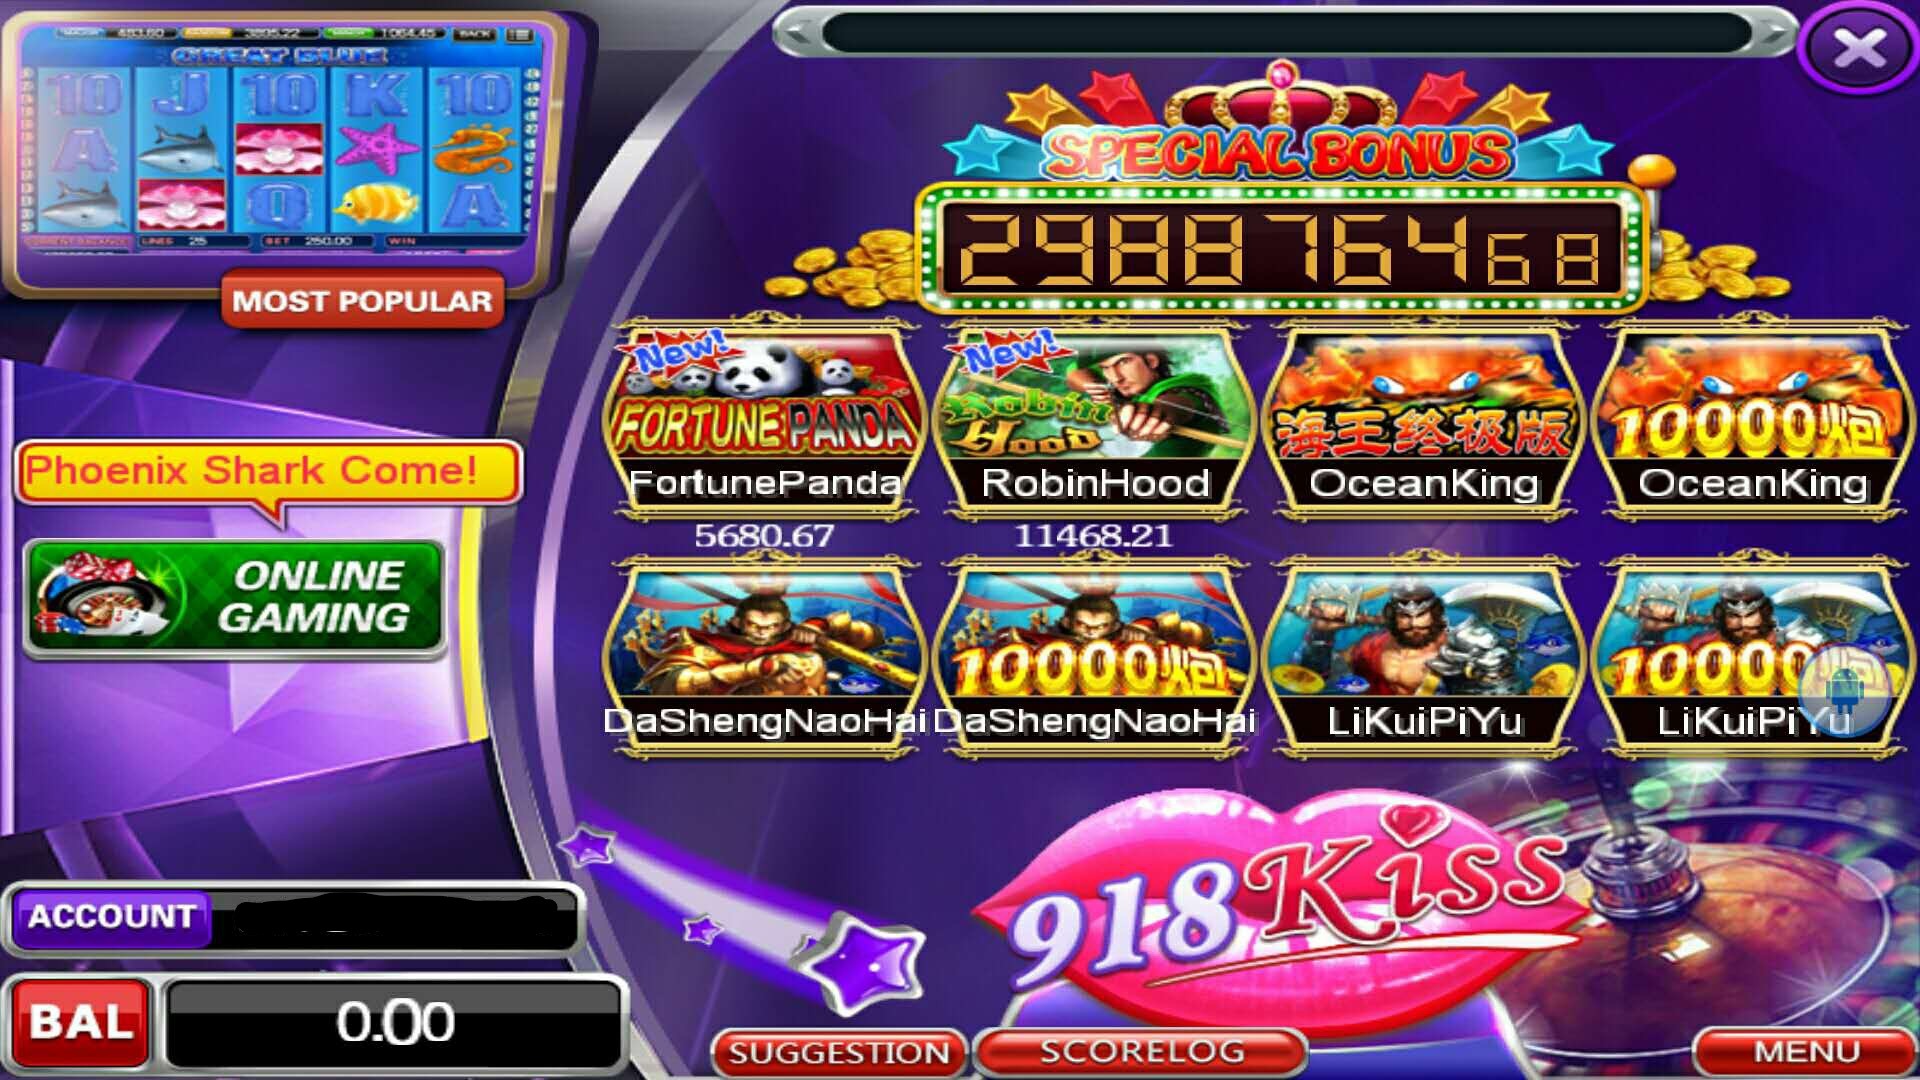 The secret of Winning SCR888 at me88 online casino Malaysia